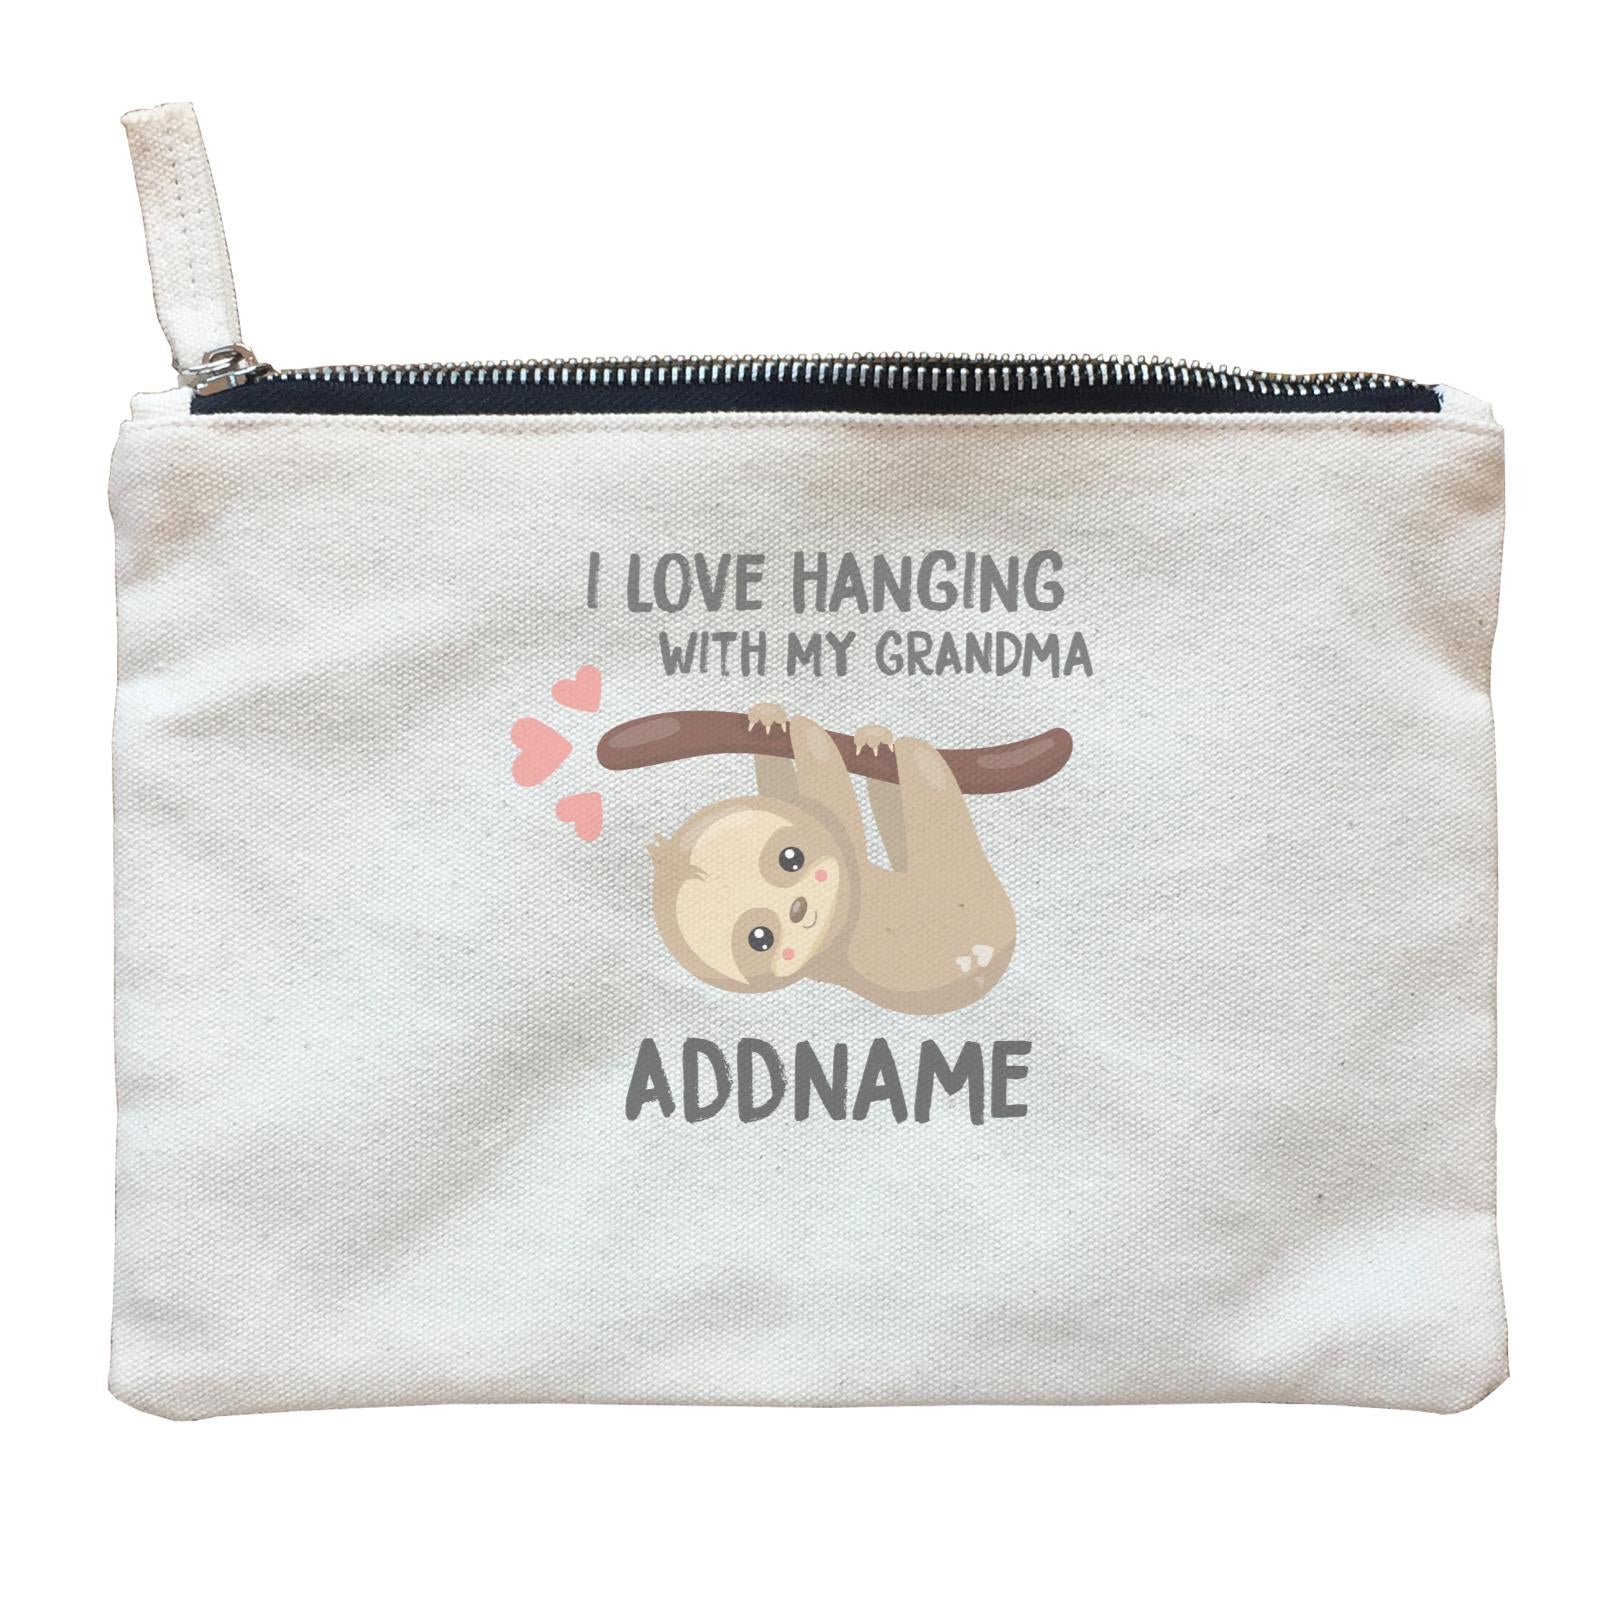 Cute Sloth I Love Hanging With My Grandma Addanme Zipper Pouch